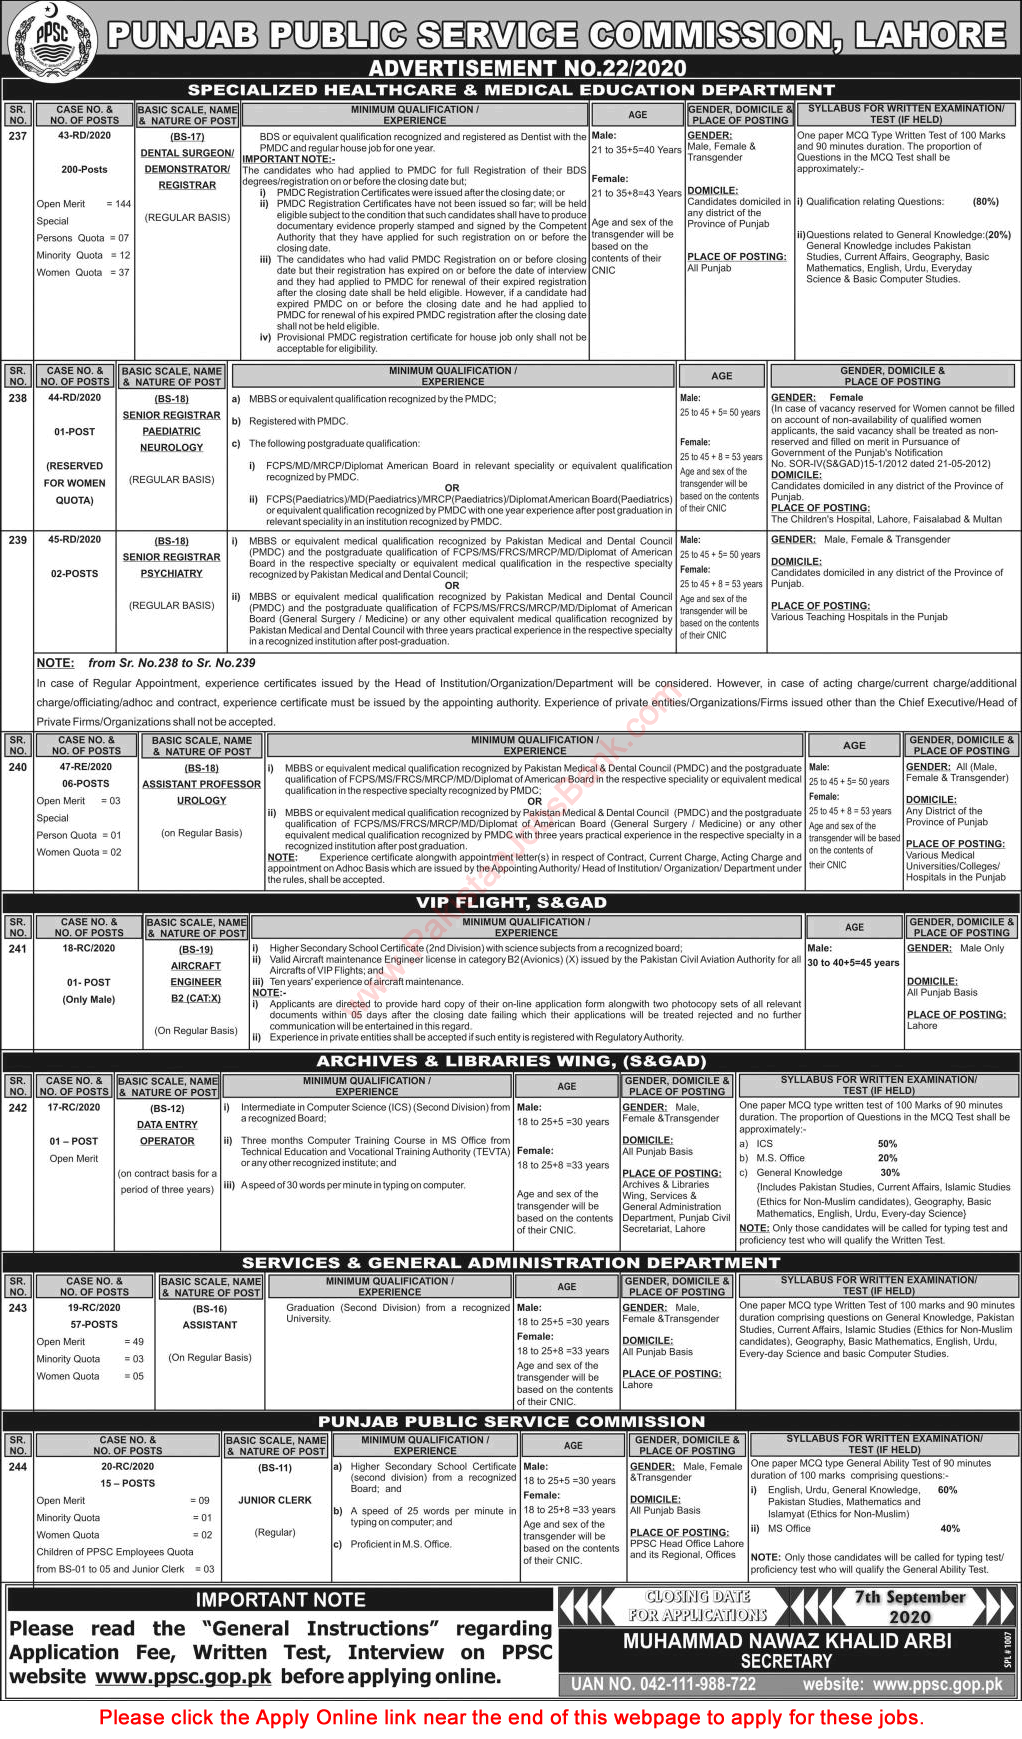 PPSC Jobs August 2020 Apply Online Consolidated Advertisement No 22/2020 Latest